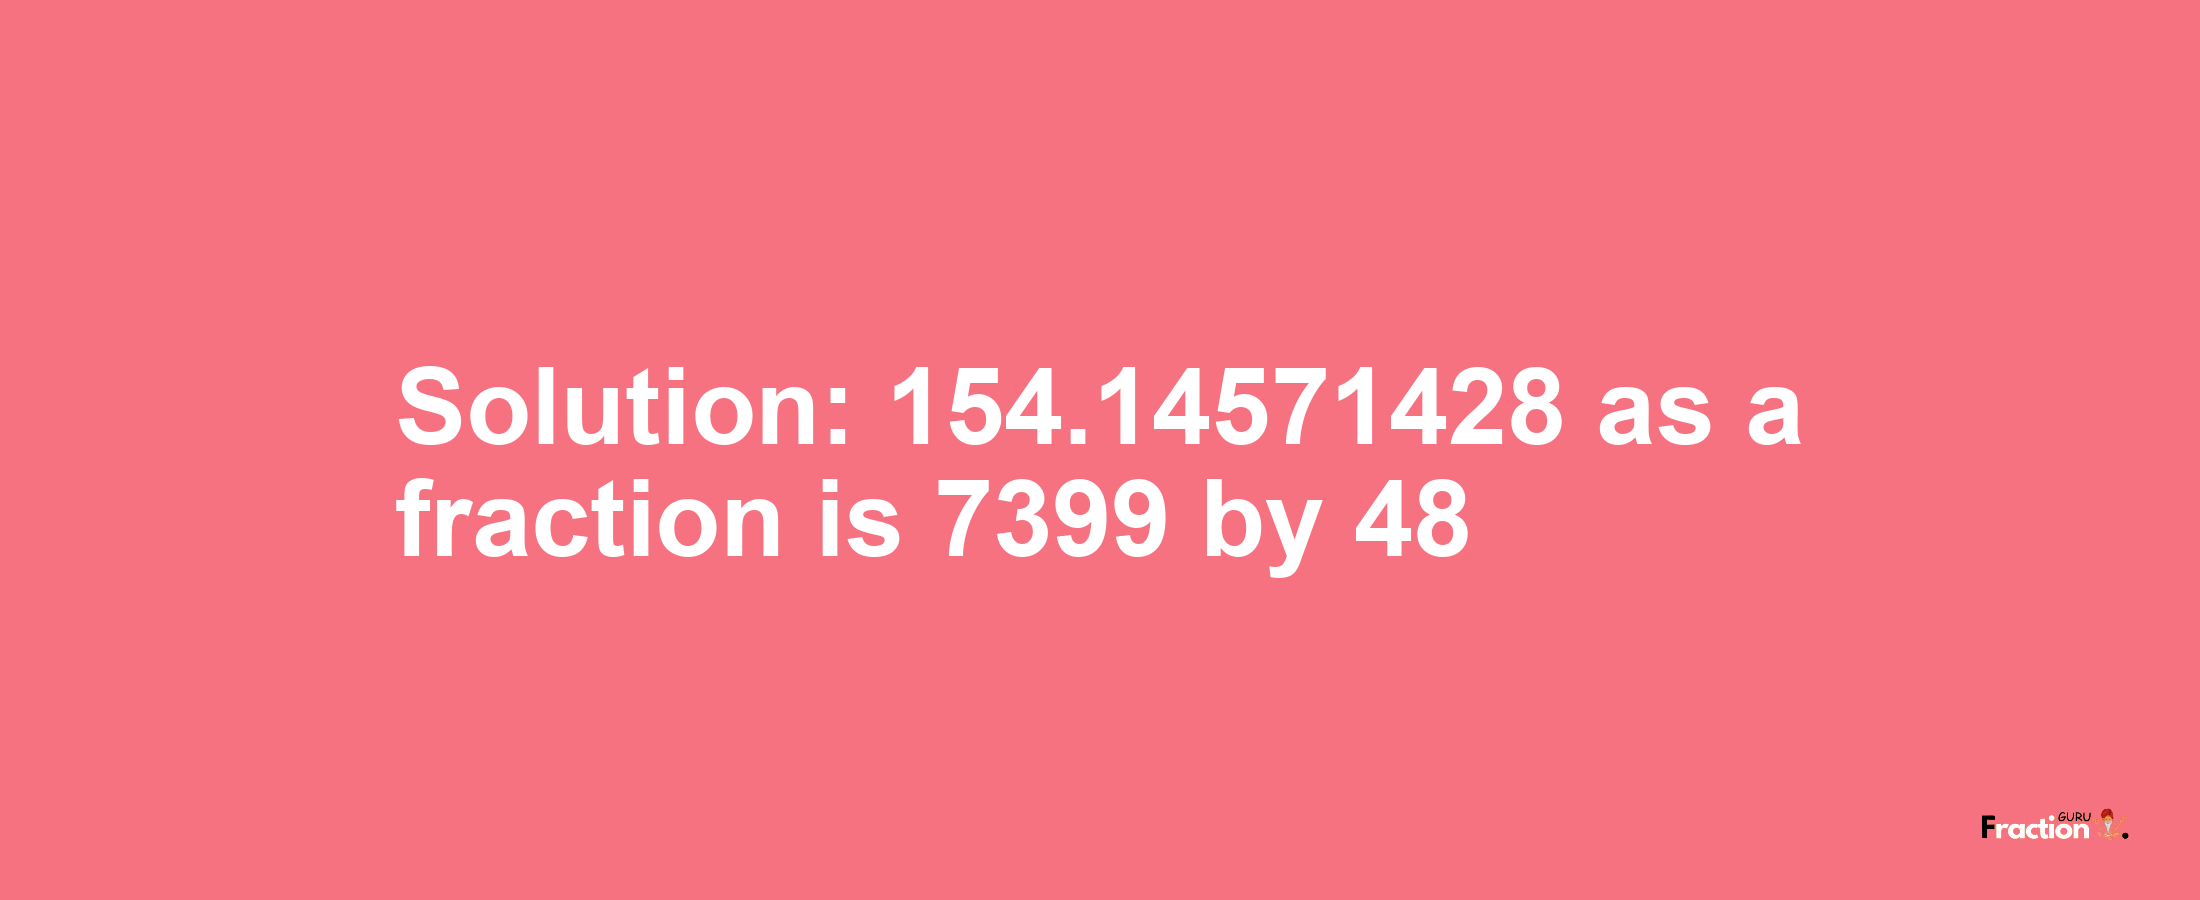 Solution:154.14571428 as a fraction is 7399/48